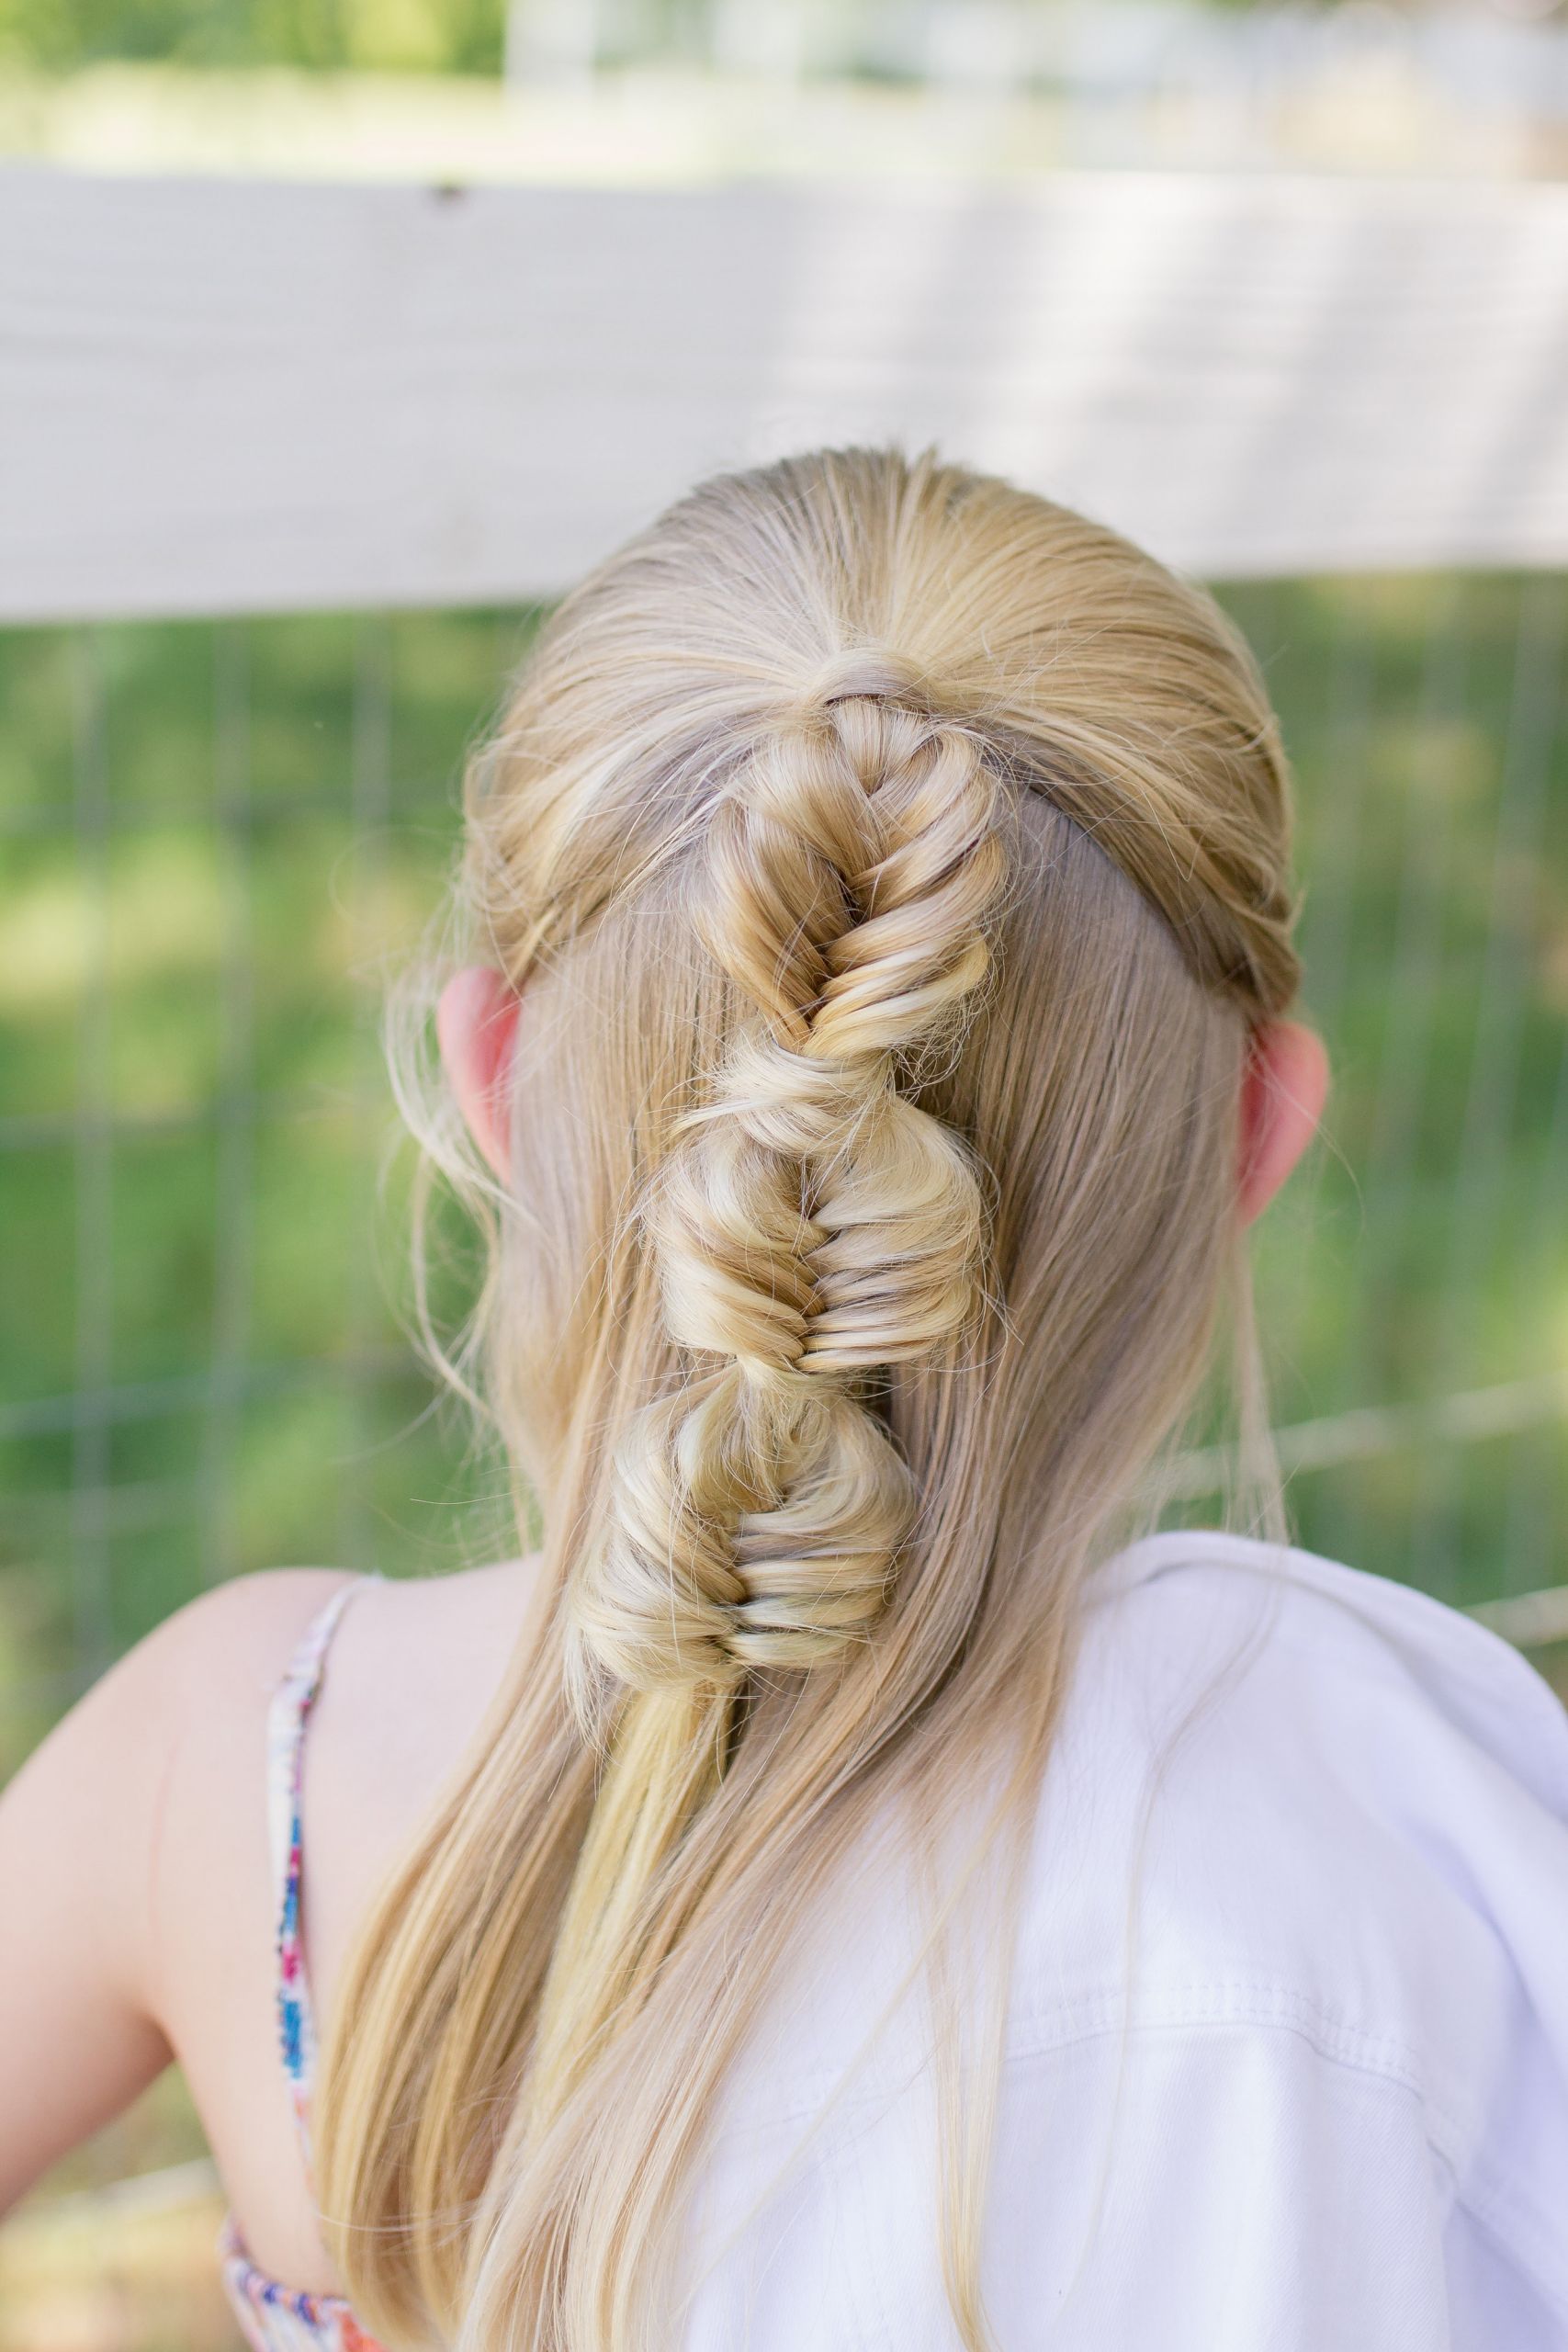 Images Of Little Girls Hairstyles
 Little Girls’ Hairstyle Inspiration